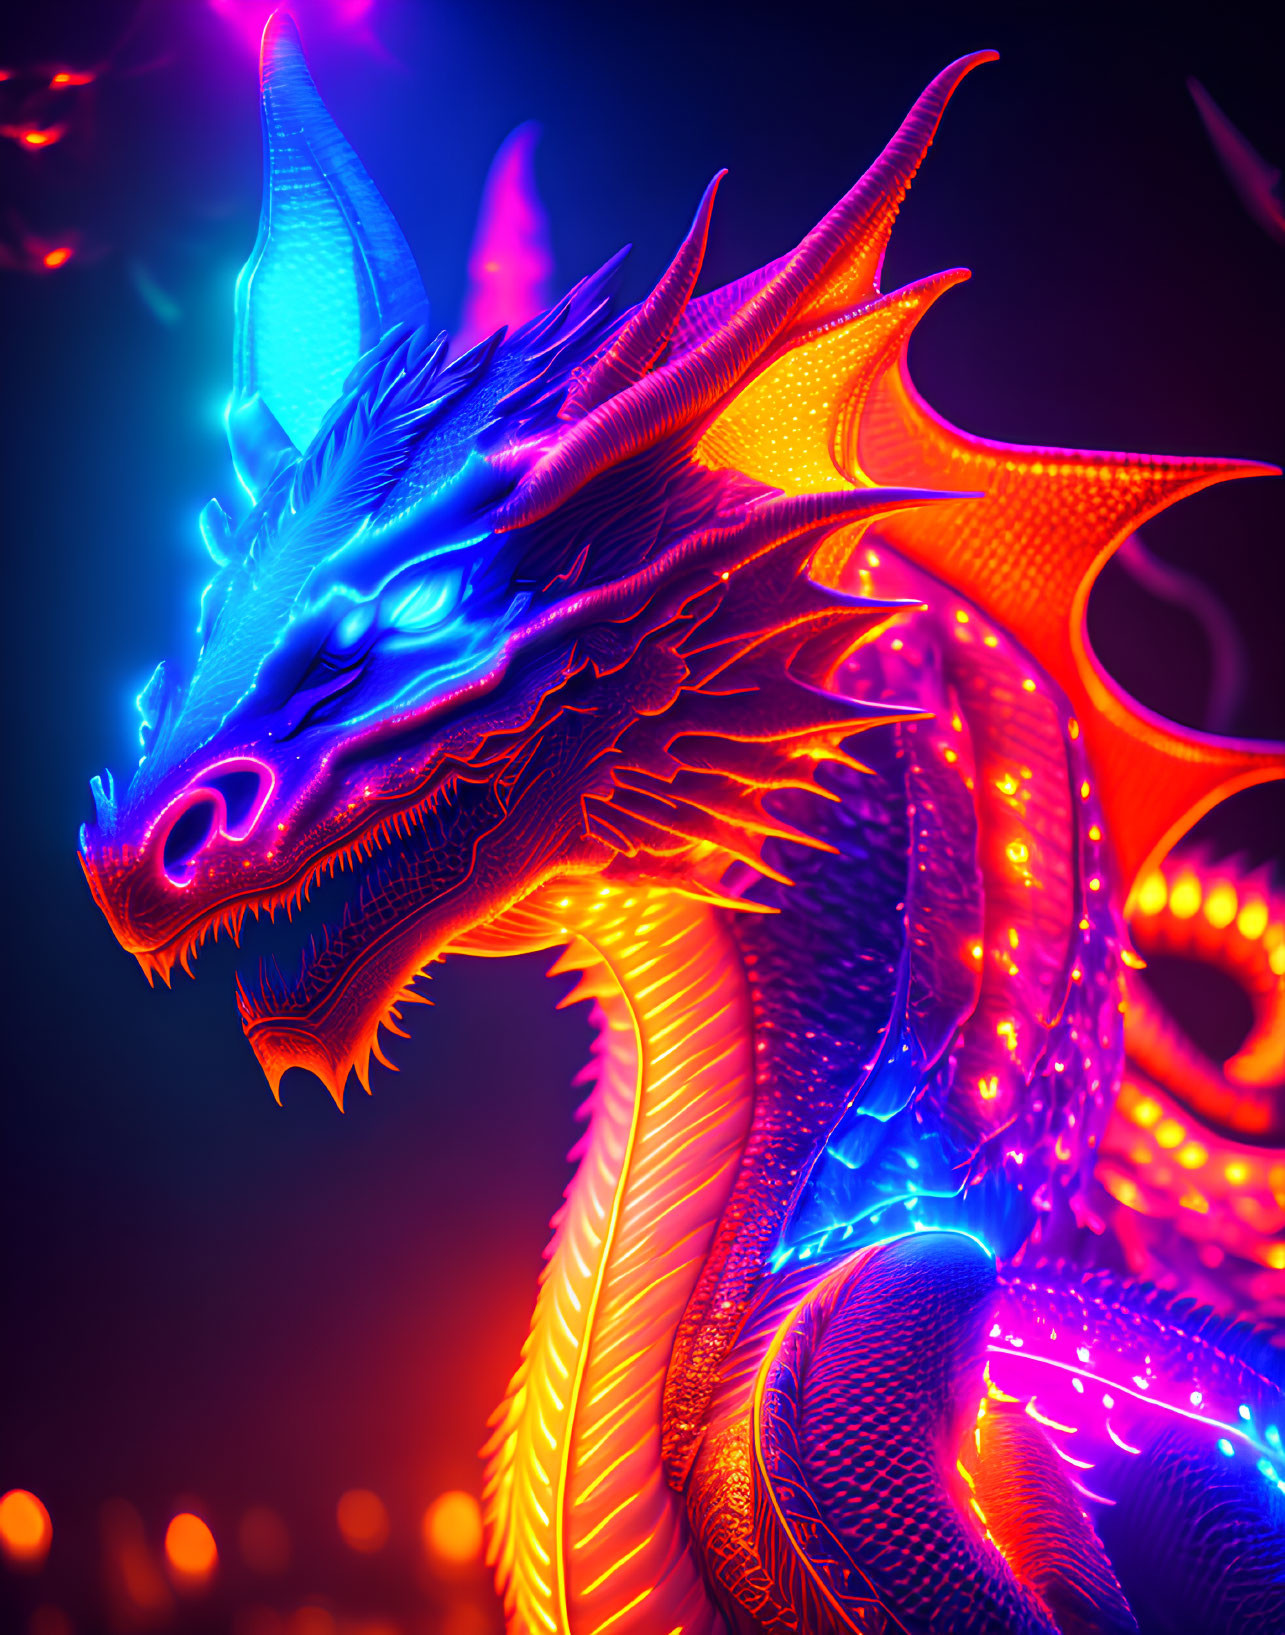 Neon-lit dragon with blue eyes and orange scales on dark background